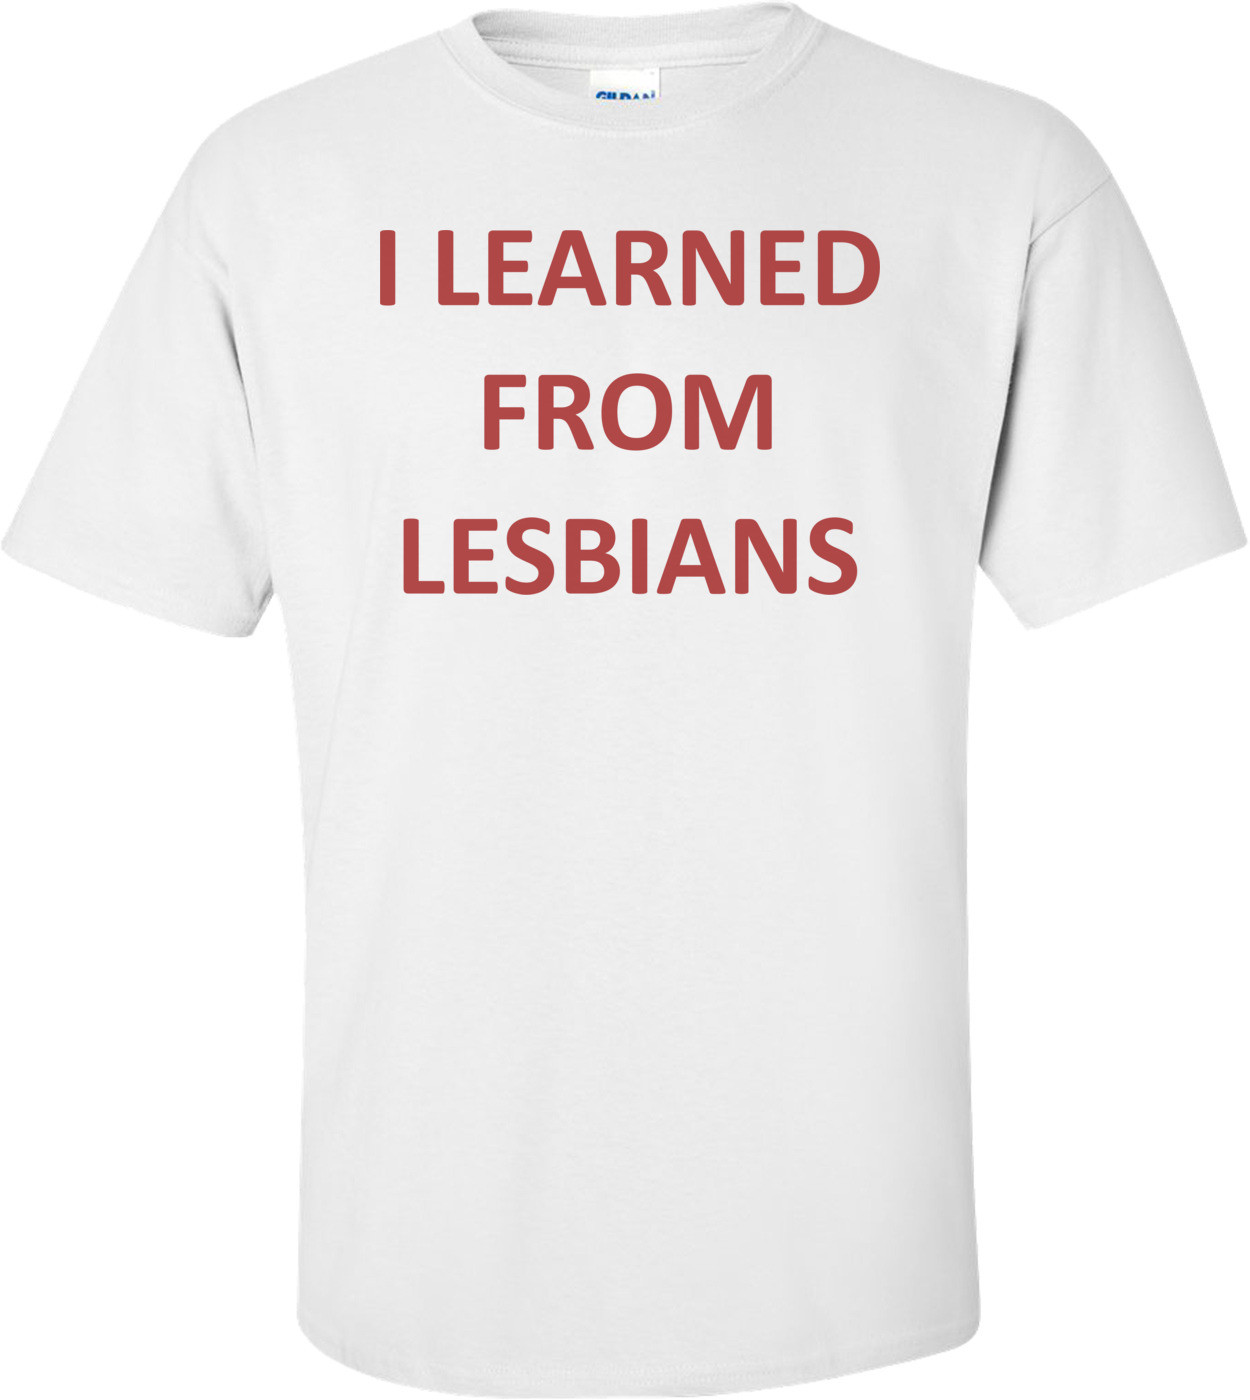 I LEARNED FROM LESBIANS Shirt